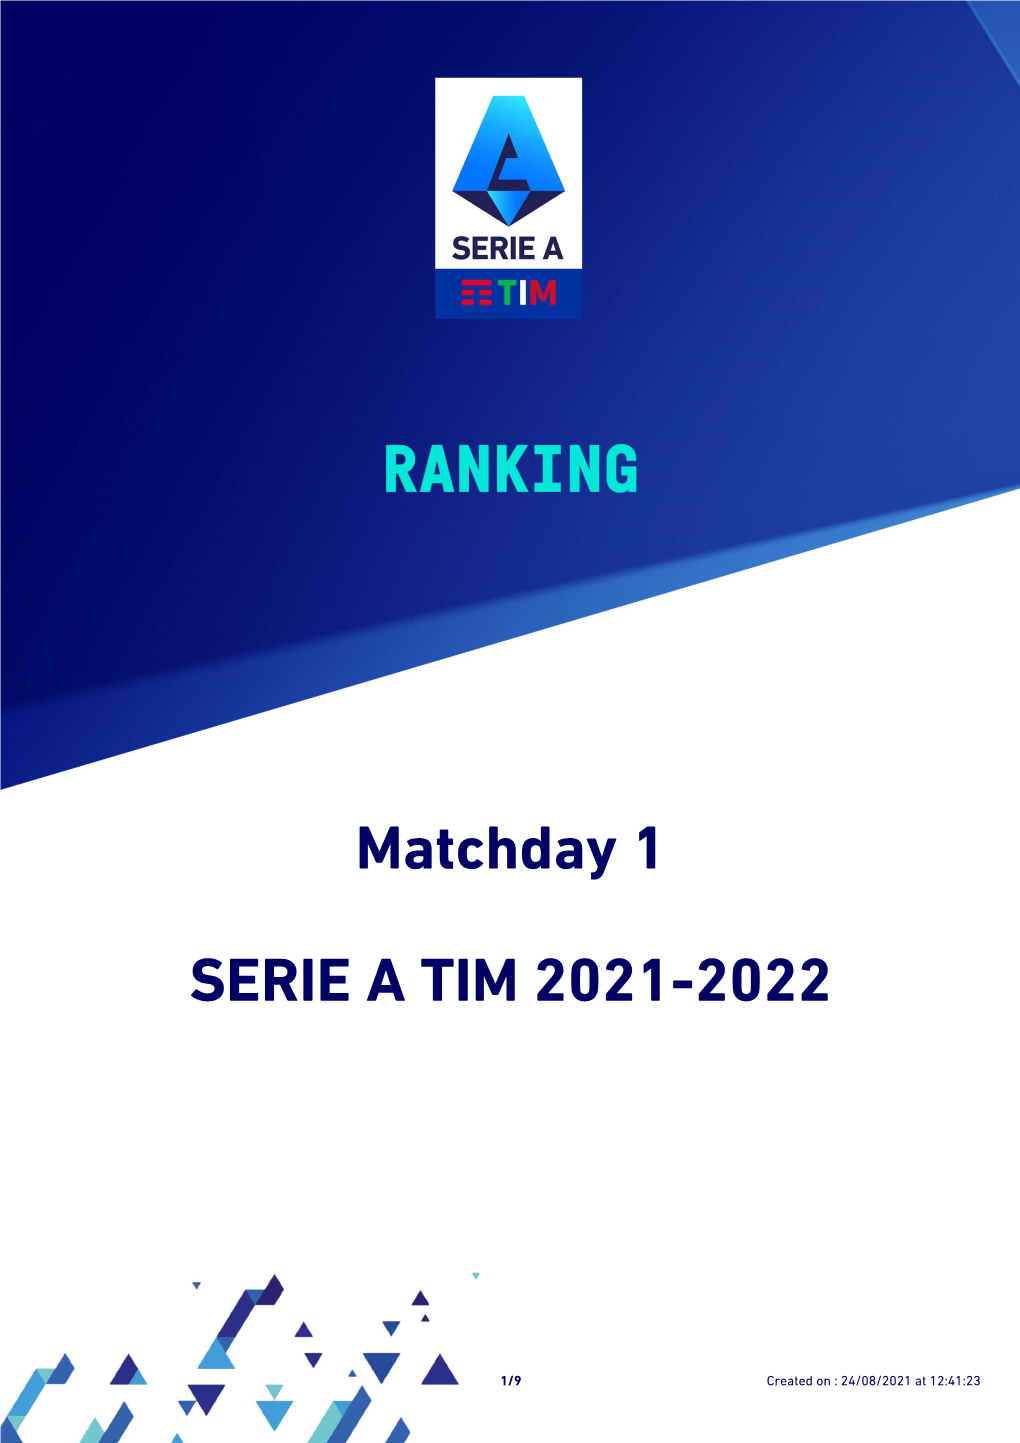 Ranking Top Players Matchday 1 Serie a TIM 2021-22